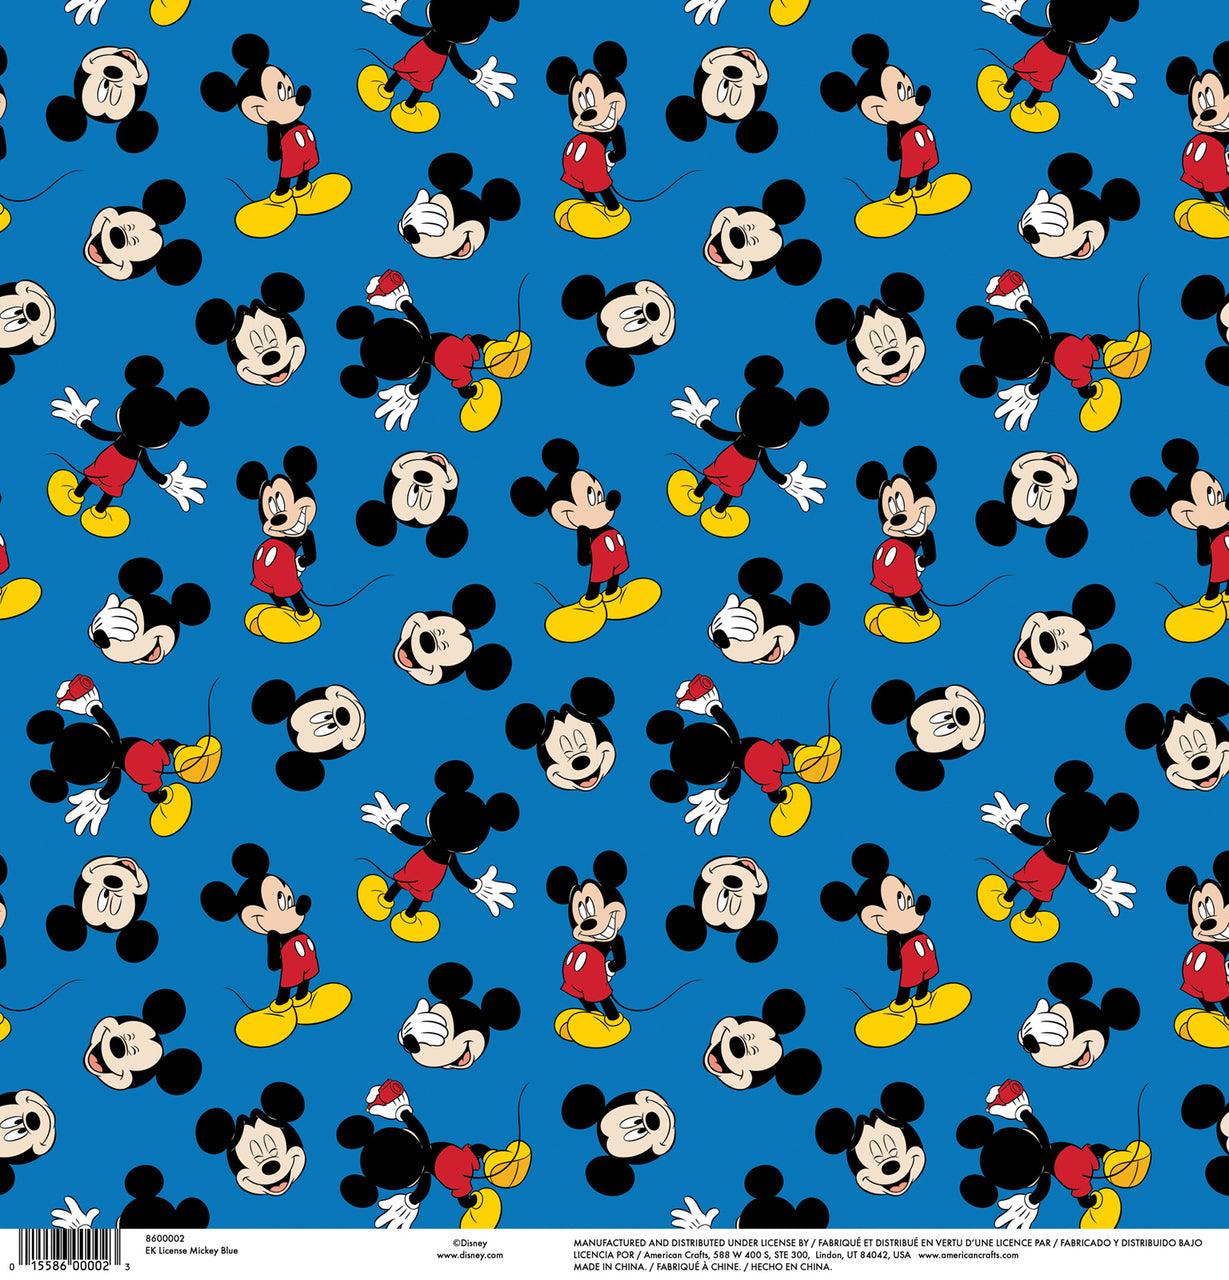 Disney Collection Mickey Blue 12 x 12 Scrapbook Paper by American Crafts - Scrapbook Supply Companies